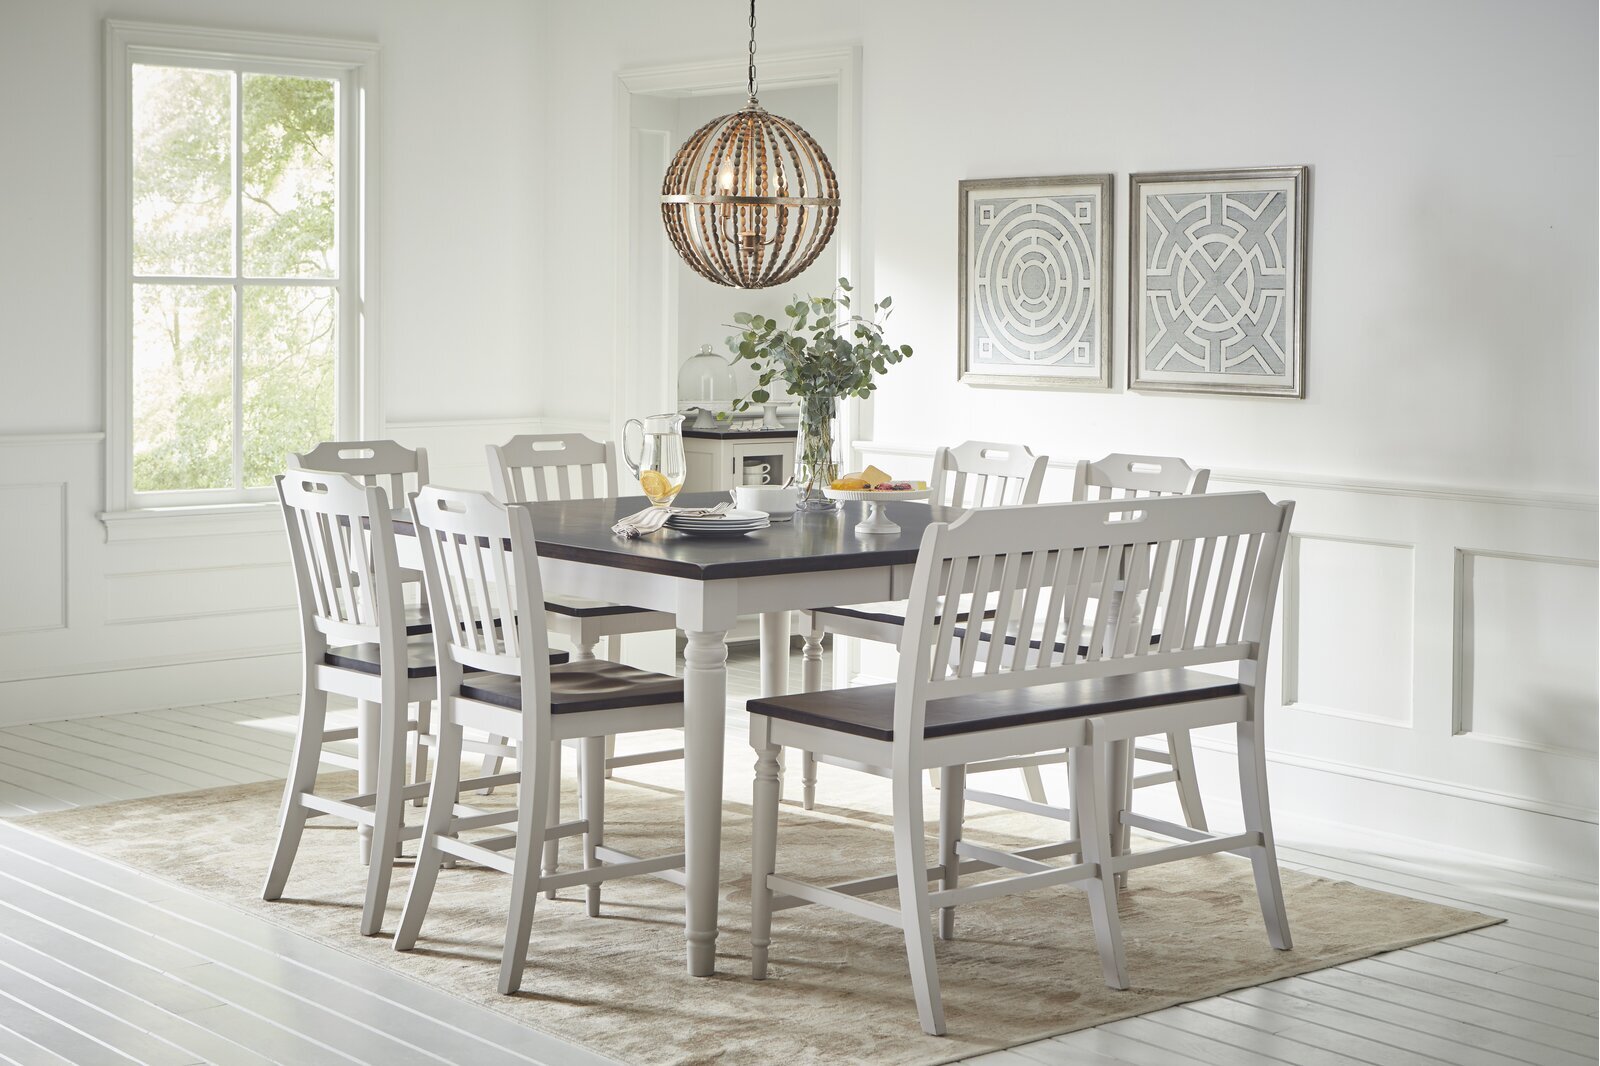 More rustic high top dining table set for 8 